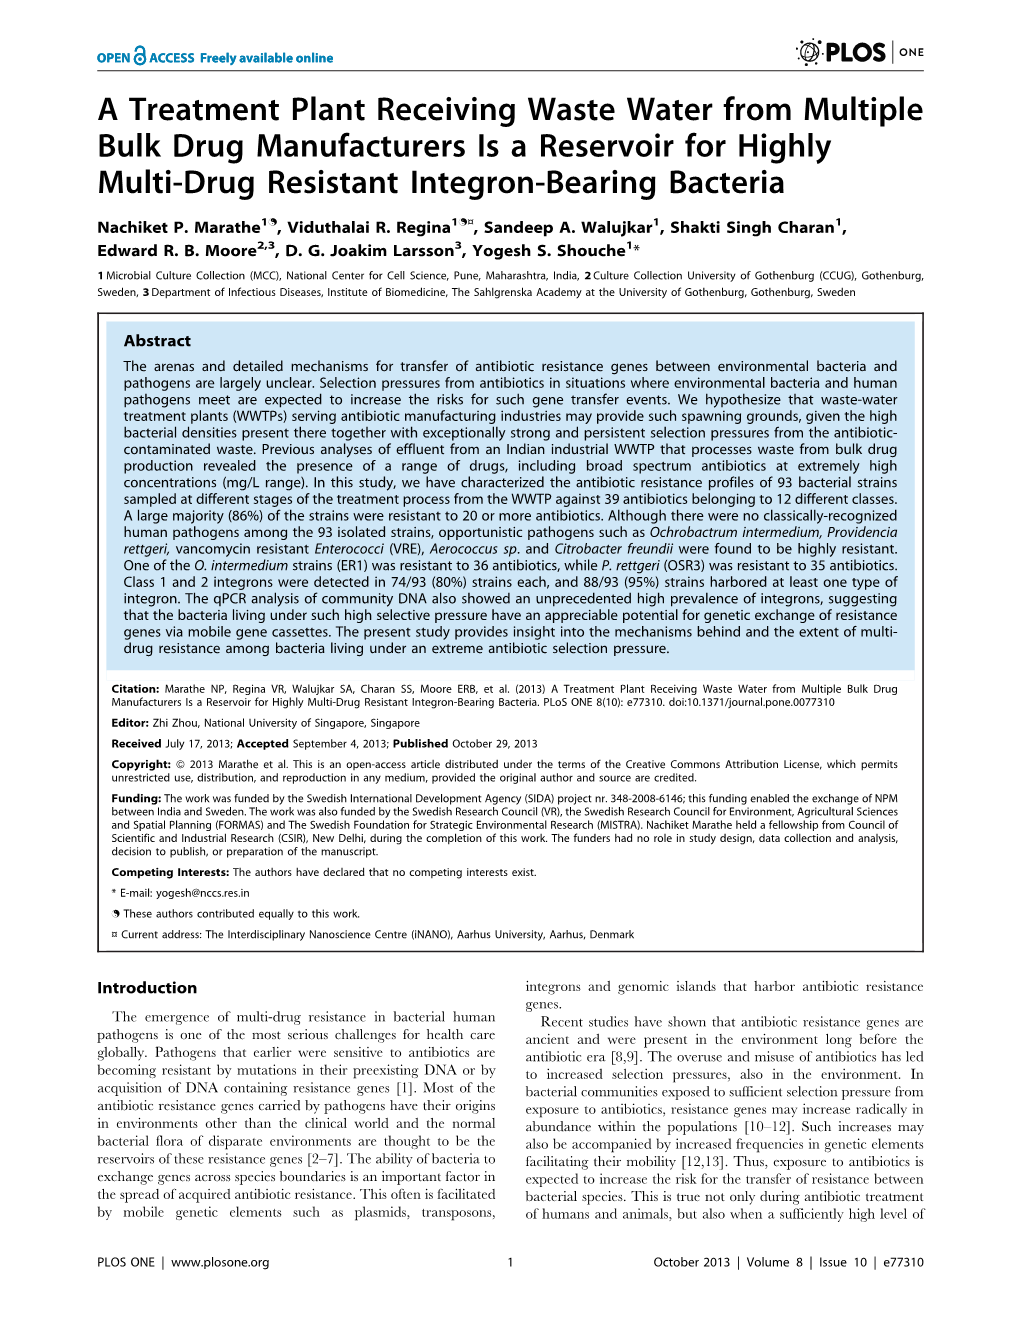 A Treatment Plant Receiving Waste Water from Multiple Bulk Drug Manufacturers Is a Reservoir for Highly Multi-Drug Resistant Integron-Bearing Bacteria